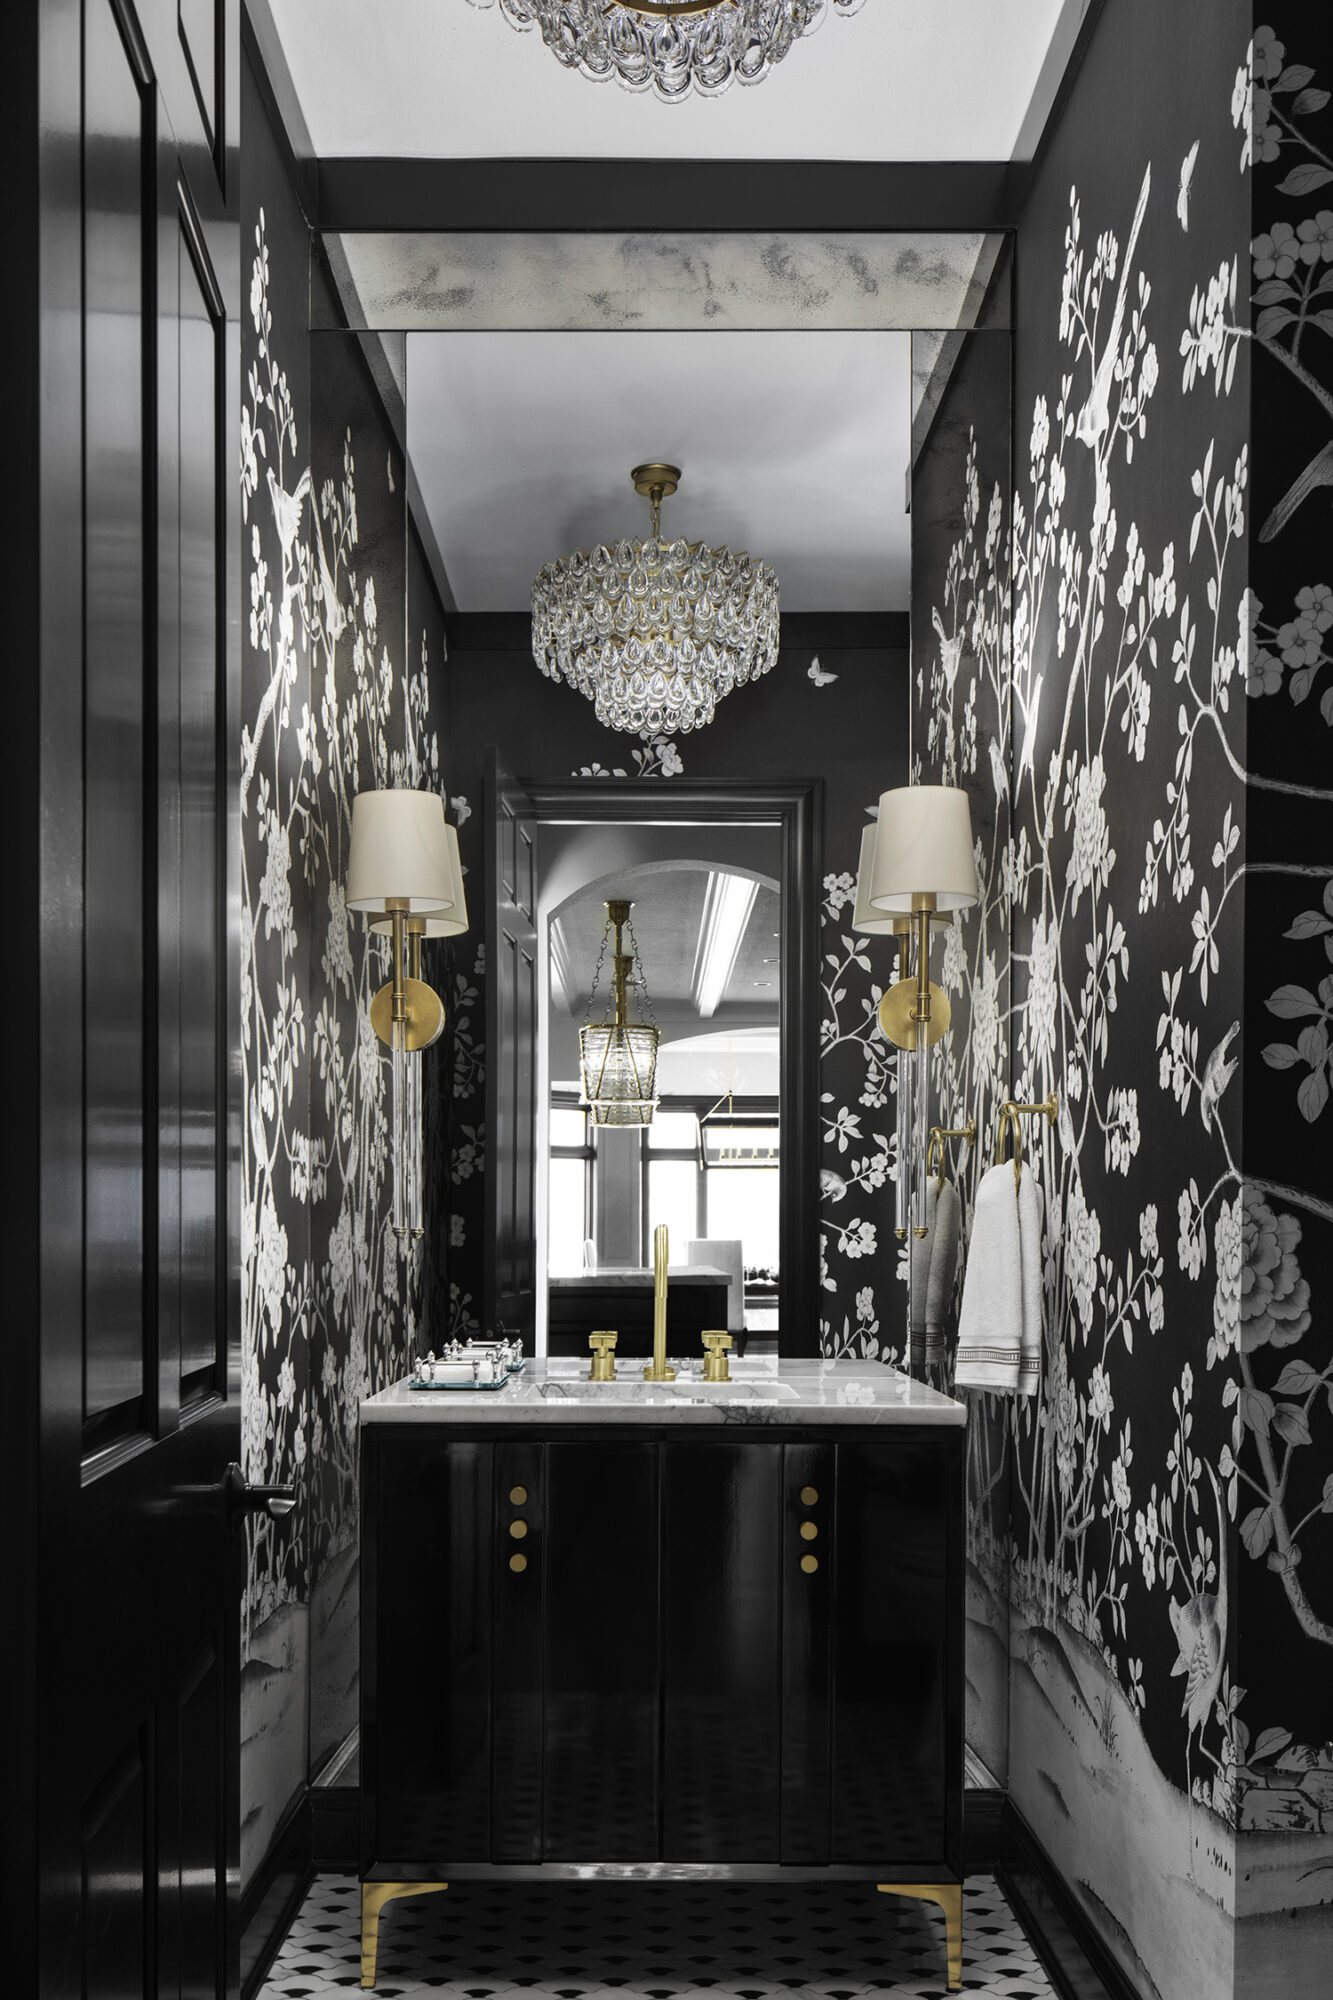 7 Maximalist Bathroom Designs Redefining ‘More Is More’